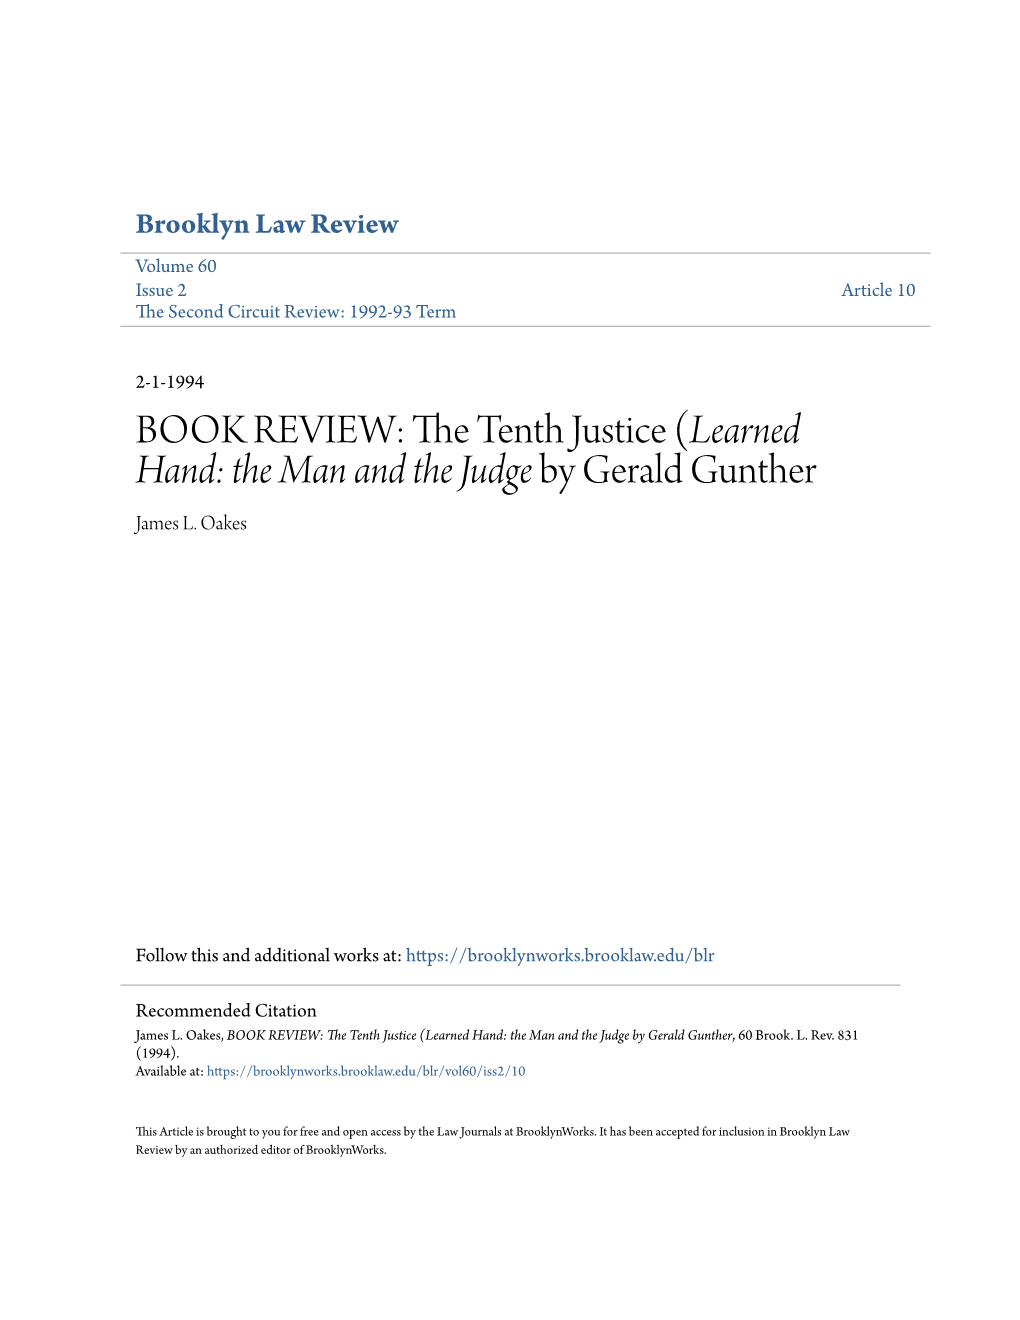 BOOK REVIEW: the Tenth Justice (Learned Hand: the Man and the Judge by Gerald Gunther, 60 Brook